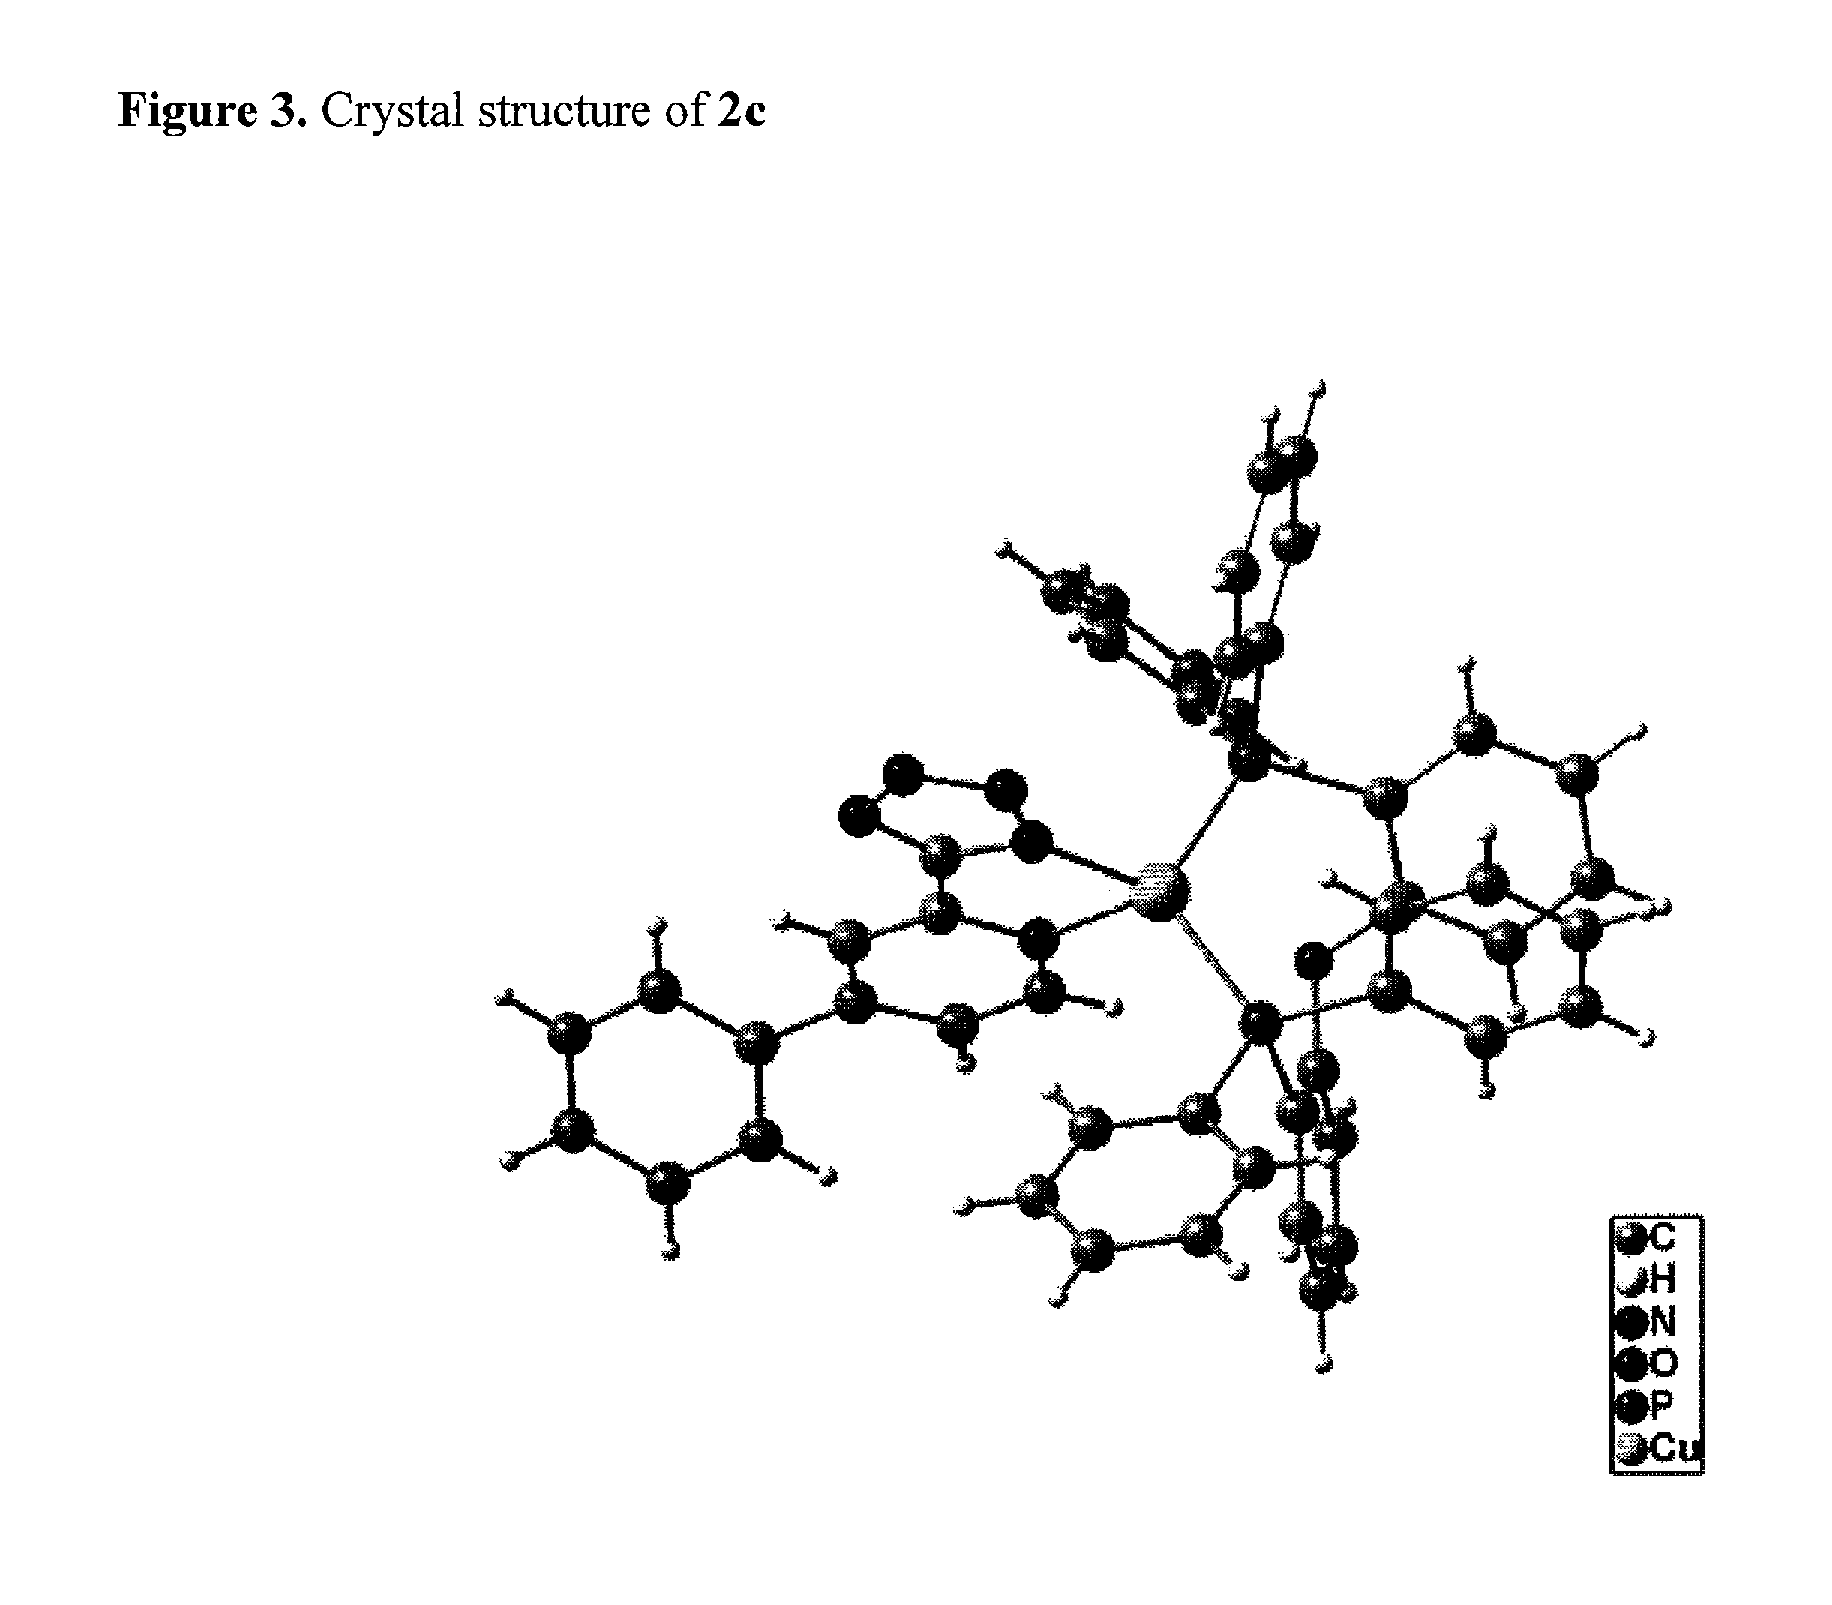 Copper(I) complexes for optoelectronic devices